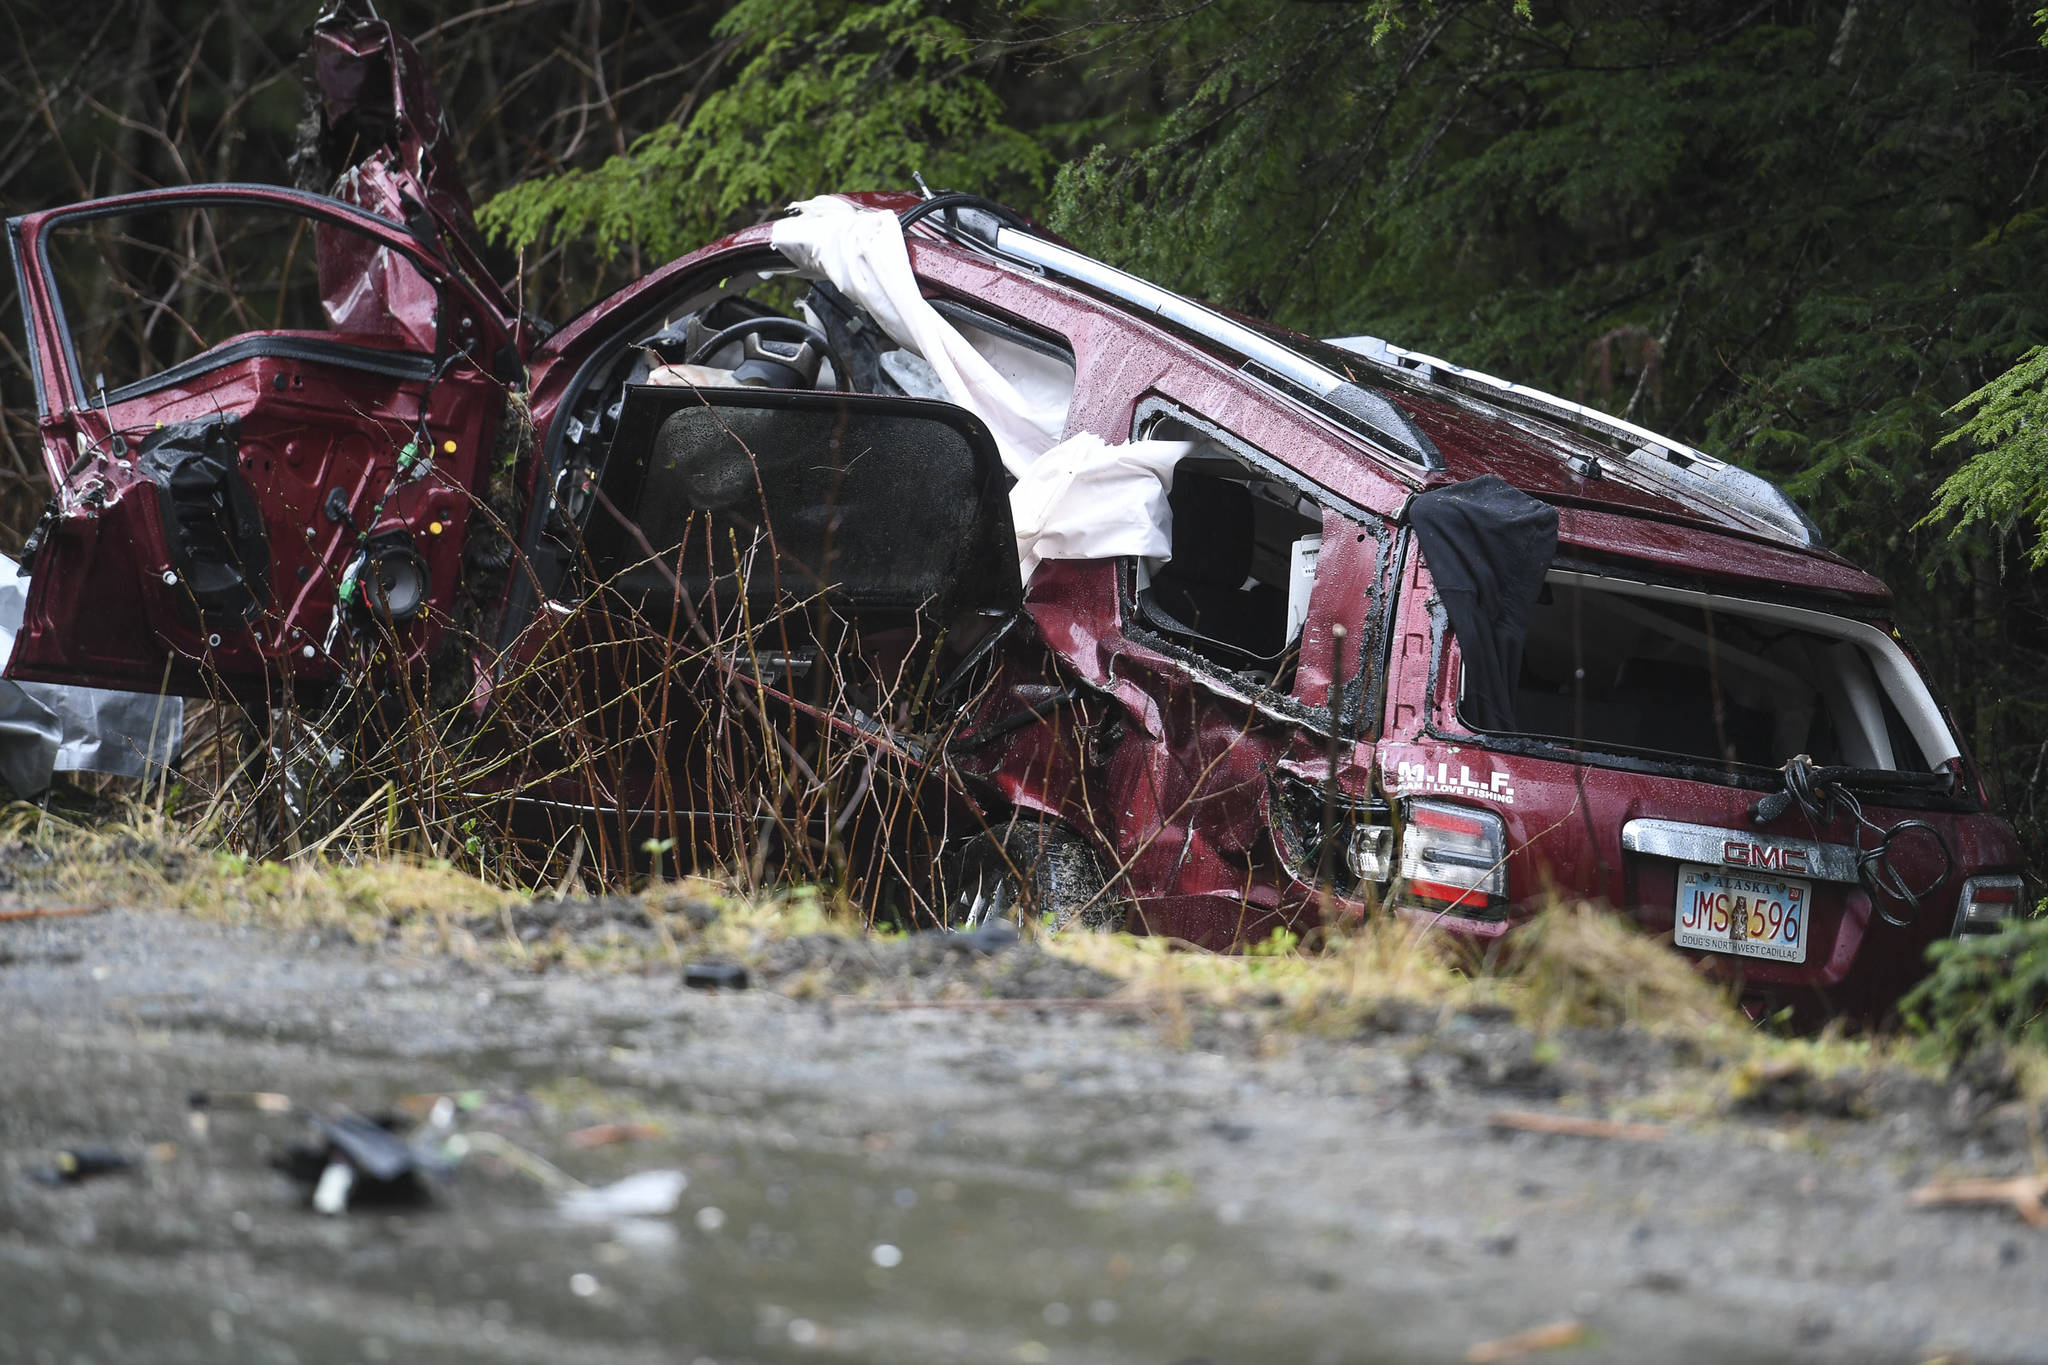 A single-vehicle wreck near Mile 23 Glacier Highway left 2 dead and 2 in critical condition on Thursday, Nov. 21, 2019. (Michael Penn | Juneau Empire)